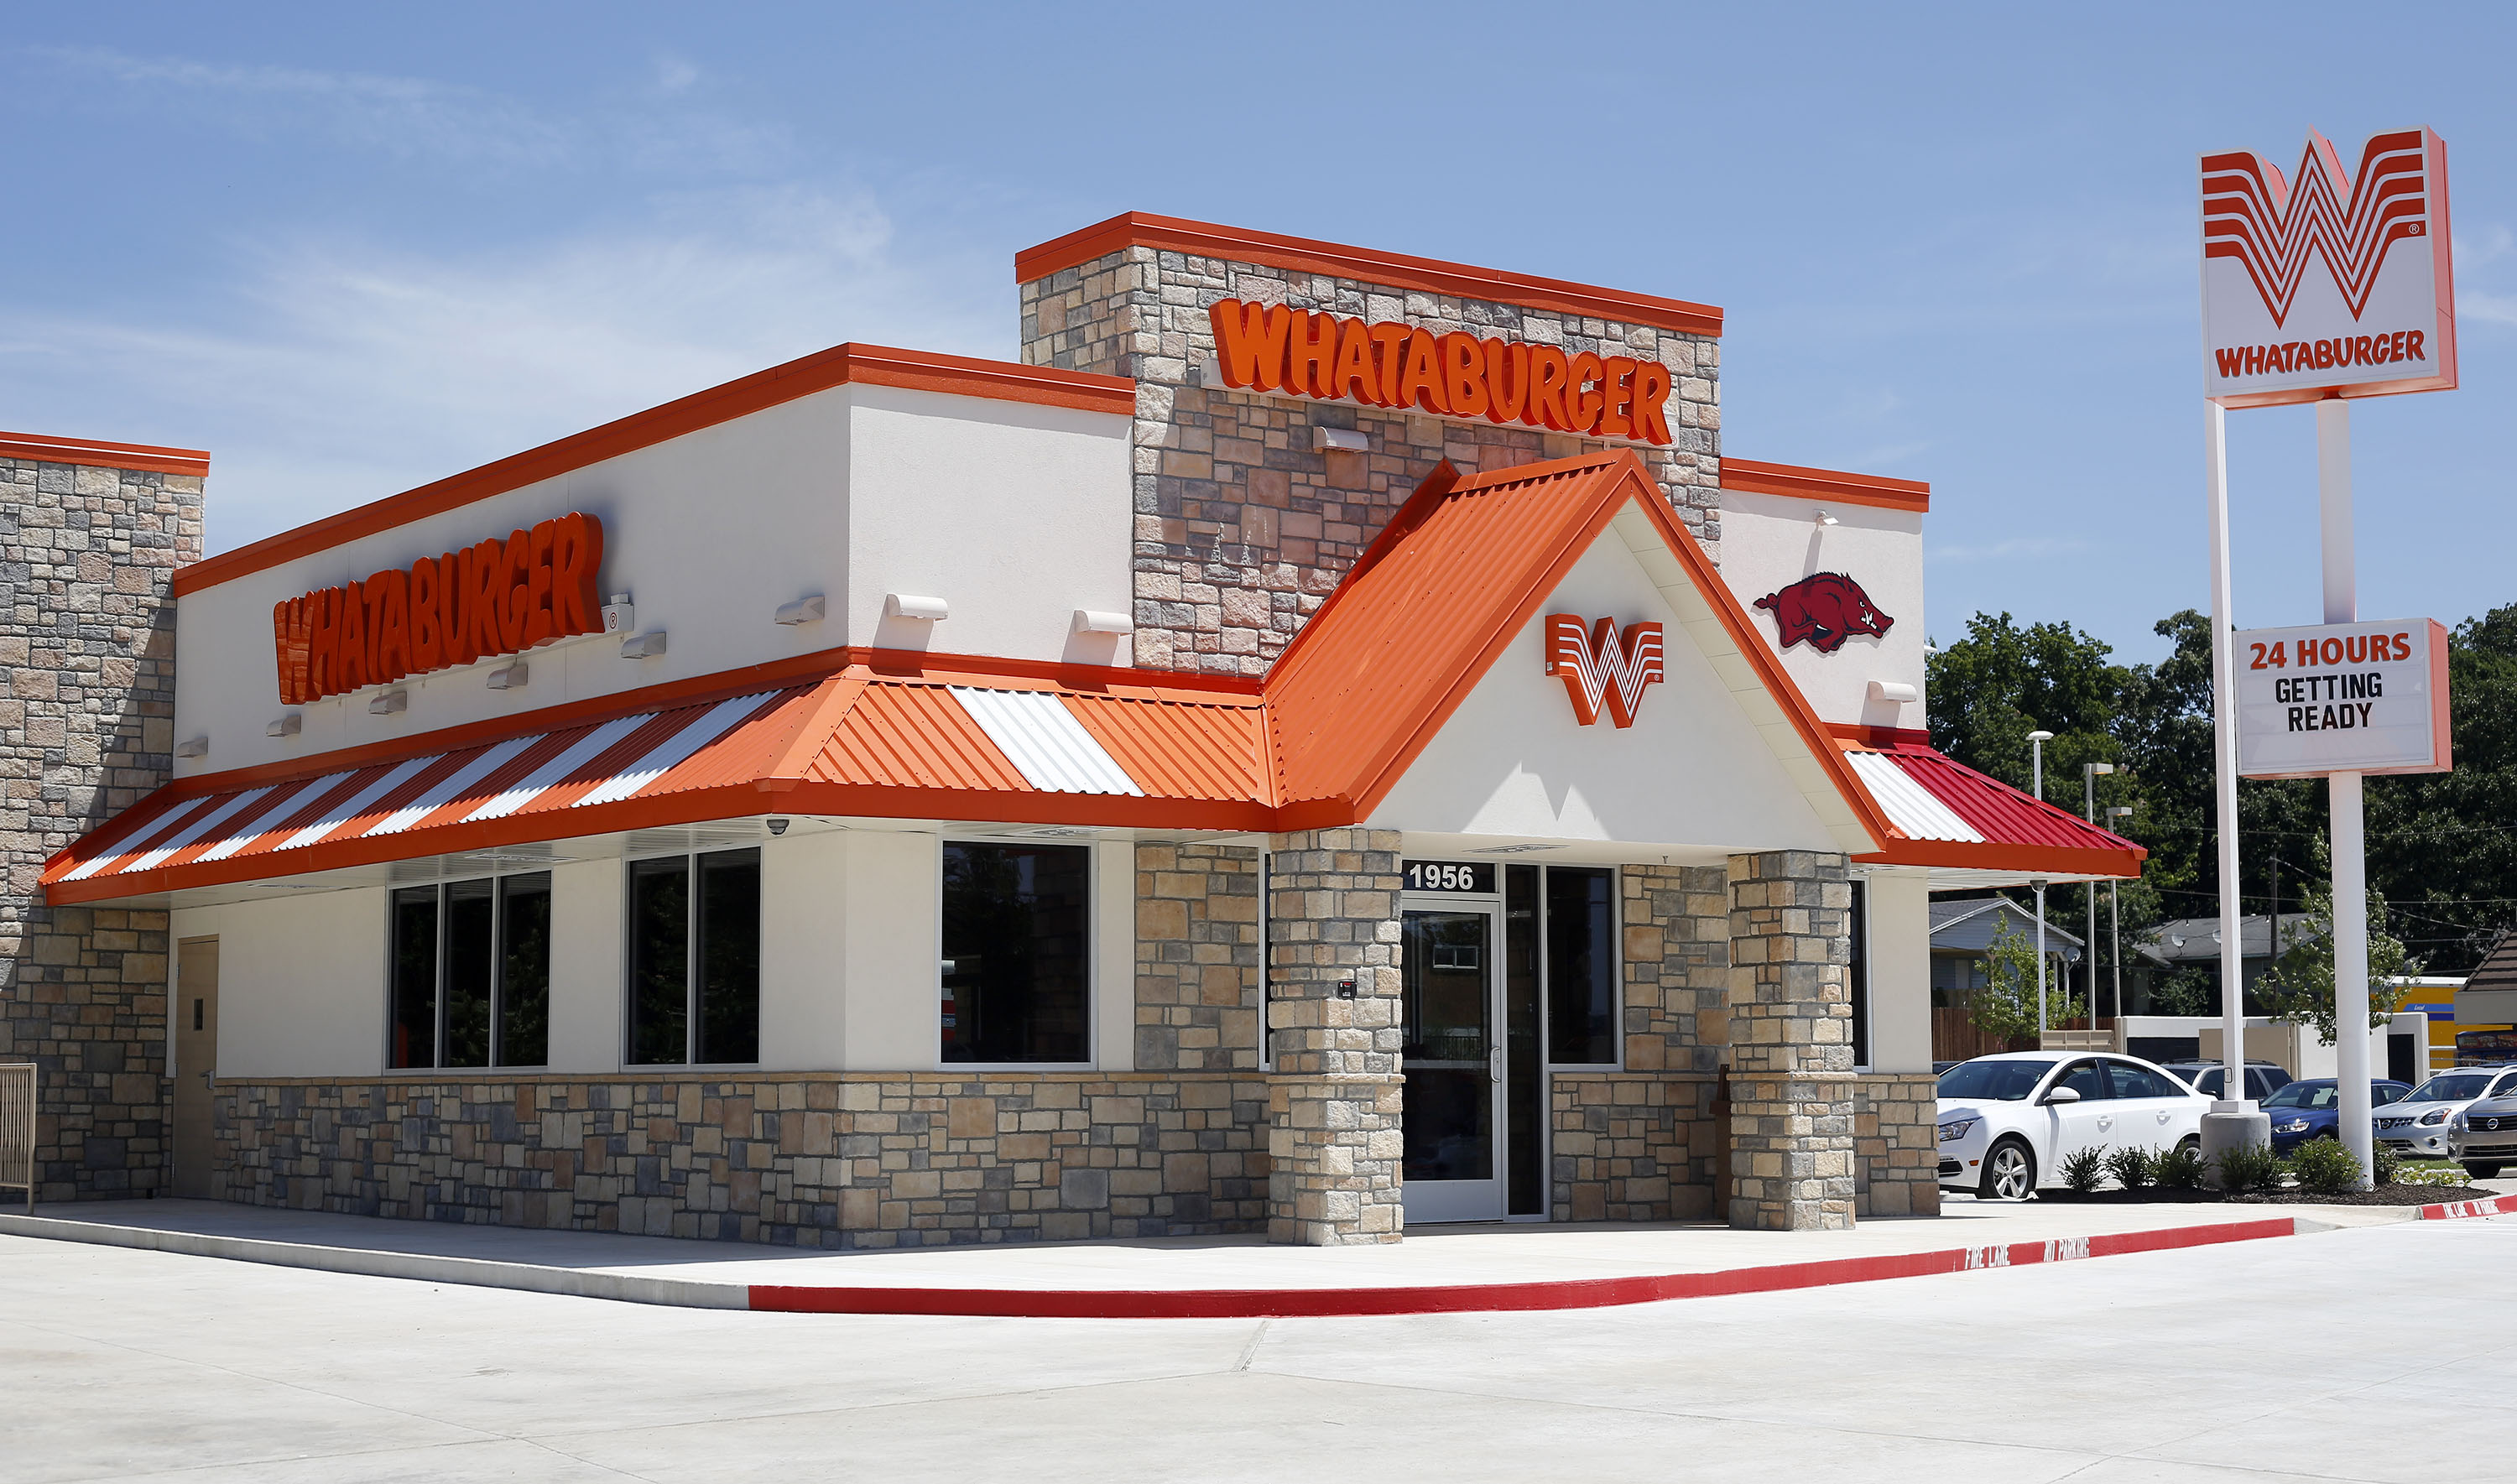 Whataburger's new 'Then & Now' feature shows the restaurant's early days